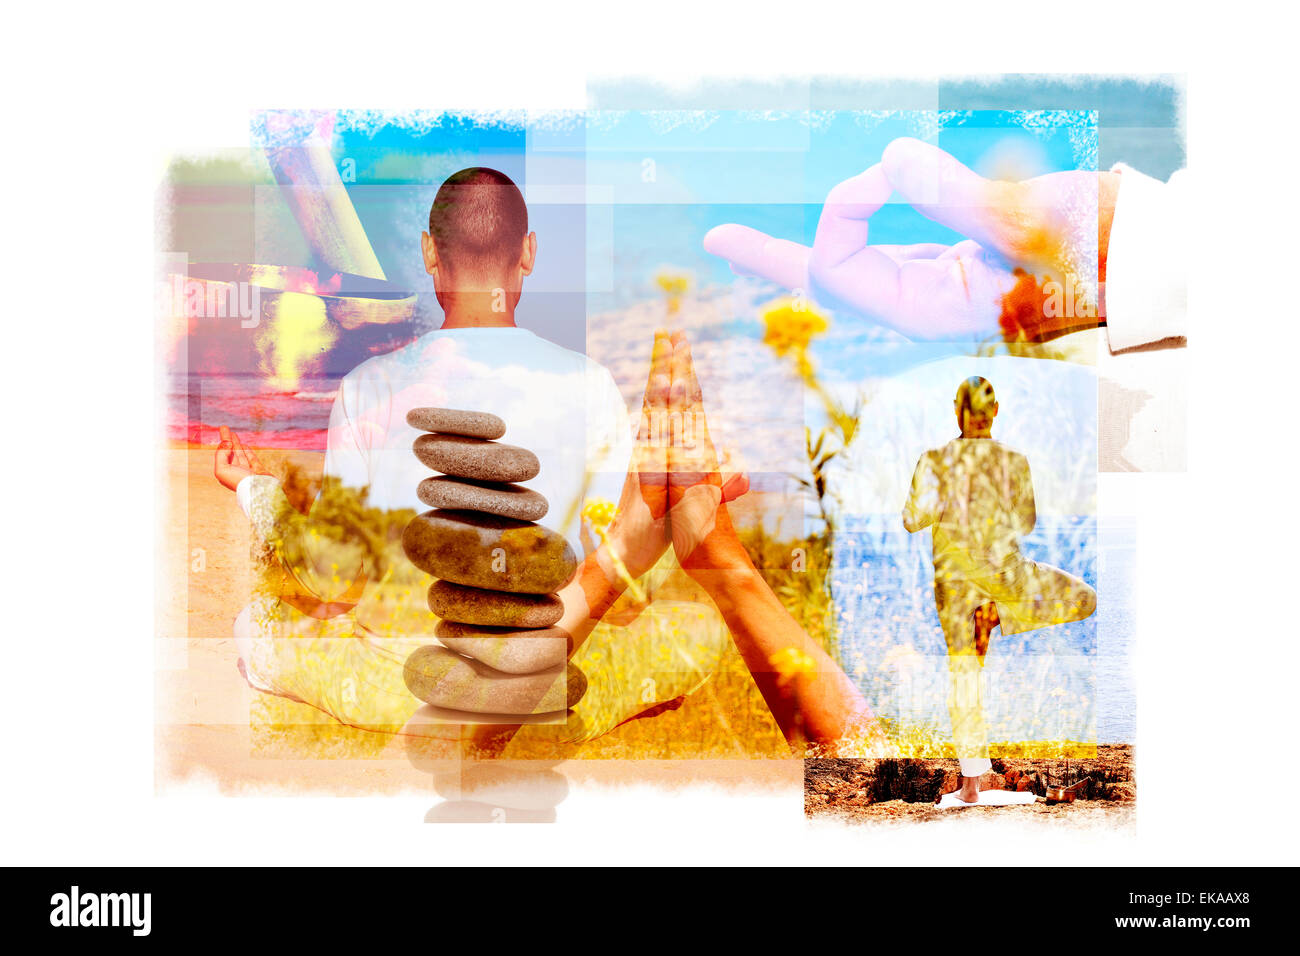 multiple exposures of a young yogi man in different yoga positions outdoors and a stack of balanced stones or a tibetan singing Stock Photo